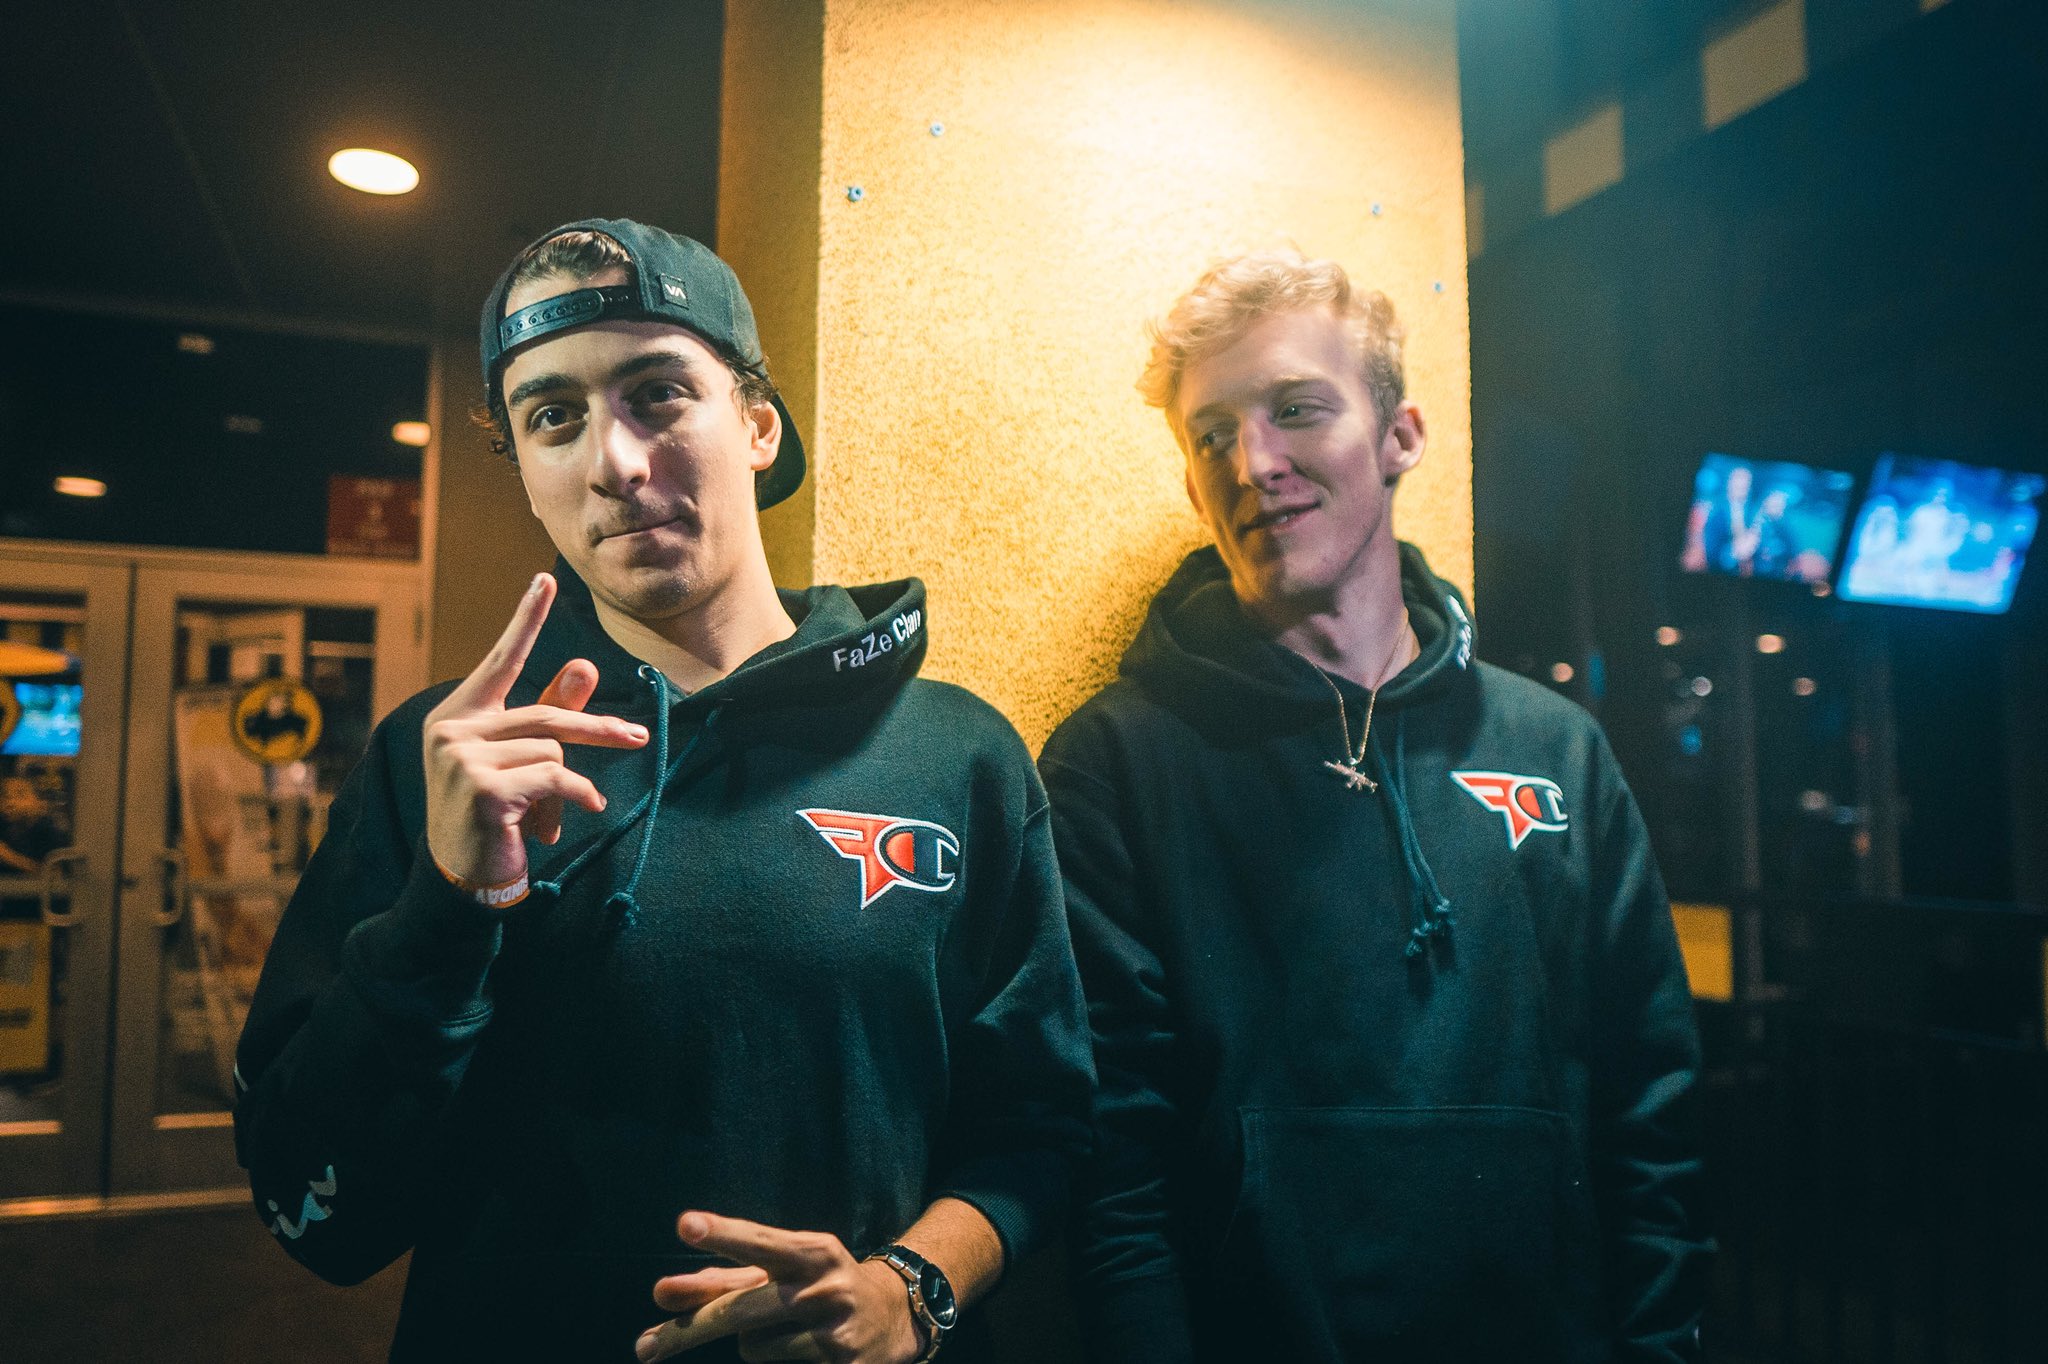 FaZe Clan on "The first drop of FaZe Clan @ChampionUSA hoodies release this weekend at @ComplexCon in Long Beach, California. Only 1 0 0 for sale https://t.co/fdIKLBXmGJ" / X